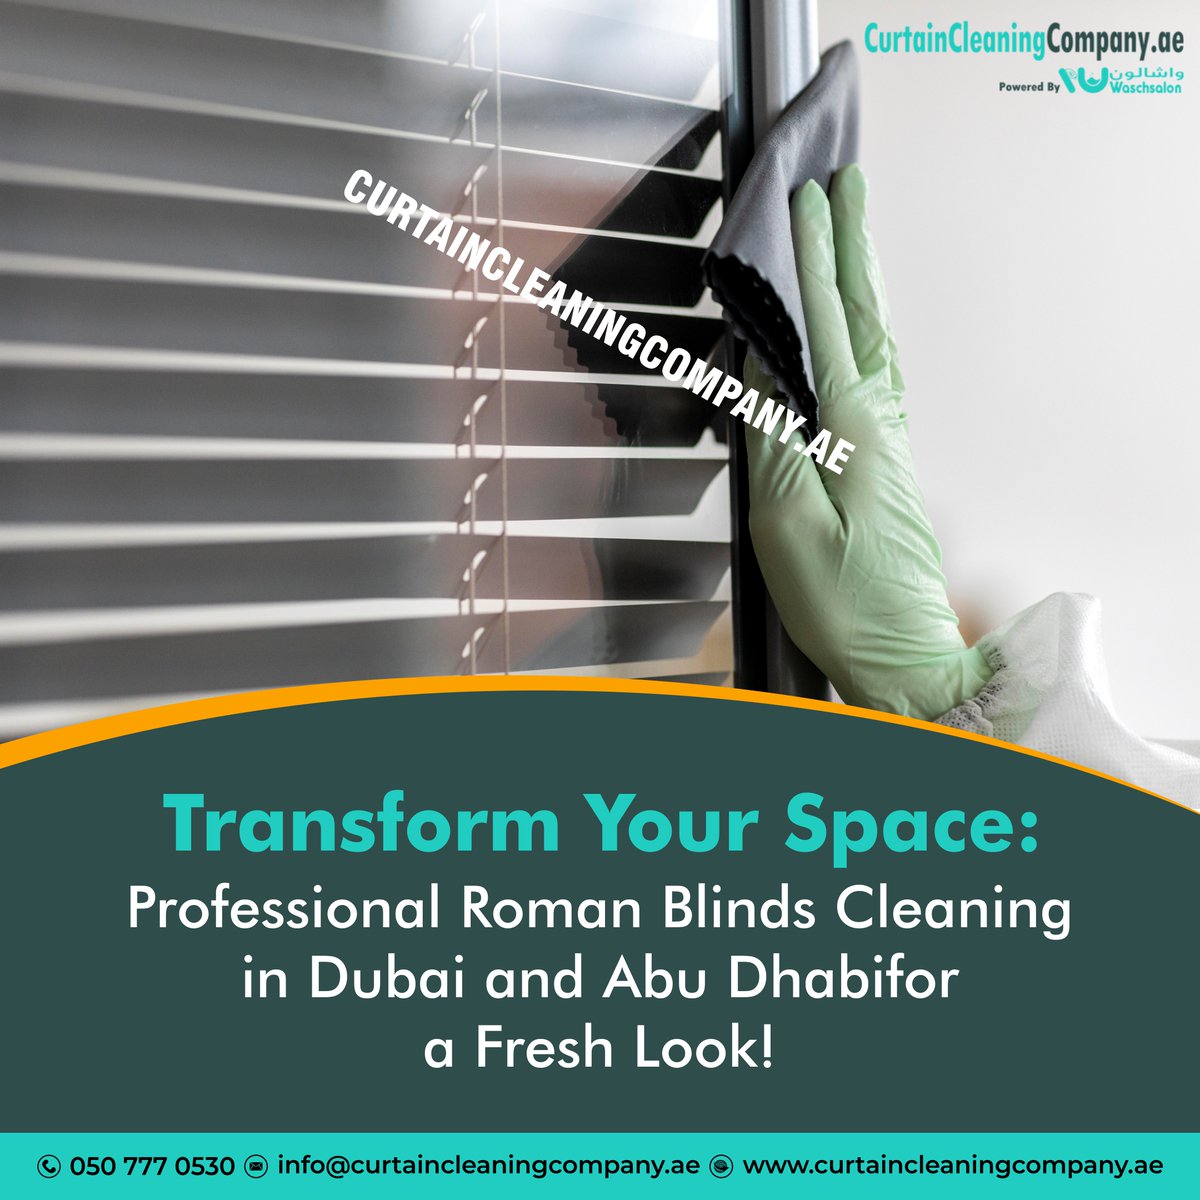 Elevate Your Interior: Discover the Magic of Professional Roman Blinds Cleaning in Dubai and Abu Dhabi for a Revitalized Space! 🌟🪞✨curtaincleaningcompany.ae/roman-blinds-c…
#abudhabi   #carpetcleaningservice #drycleaning #drycleaner #carpetcleaners #laundry #dubai #uae #laundryservice